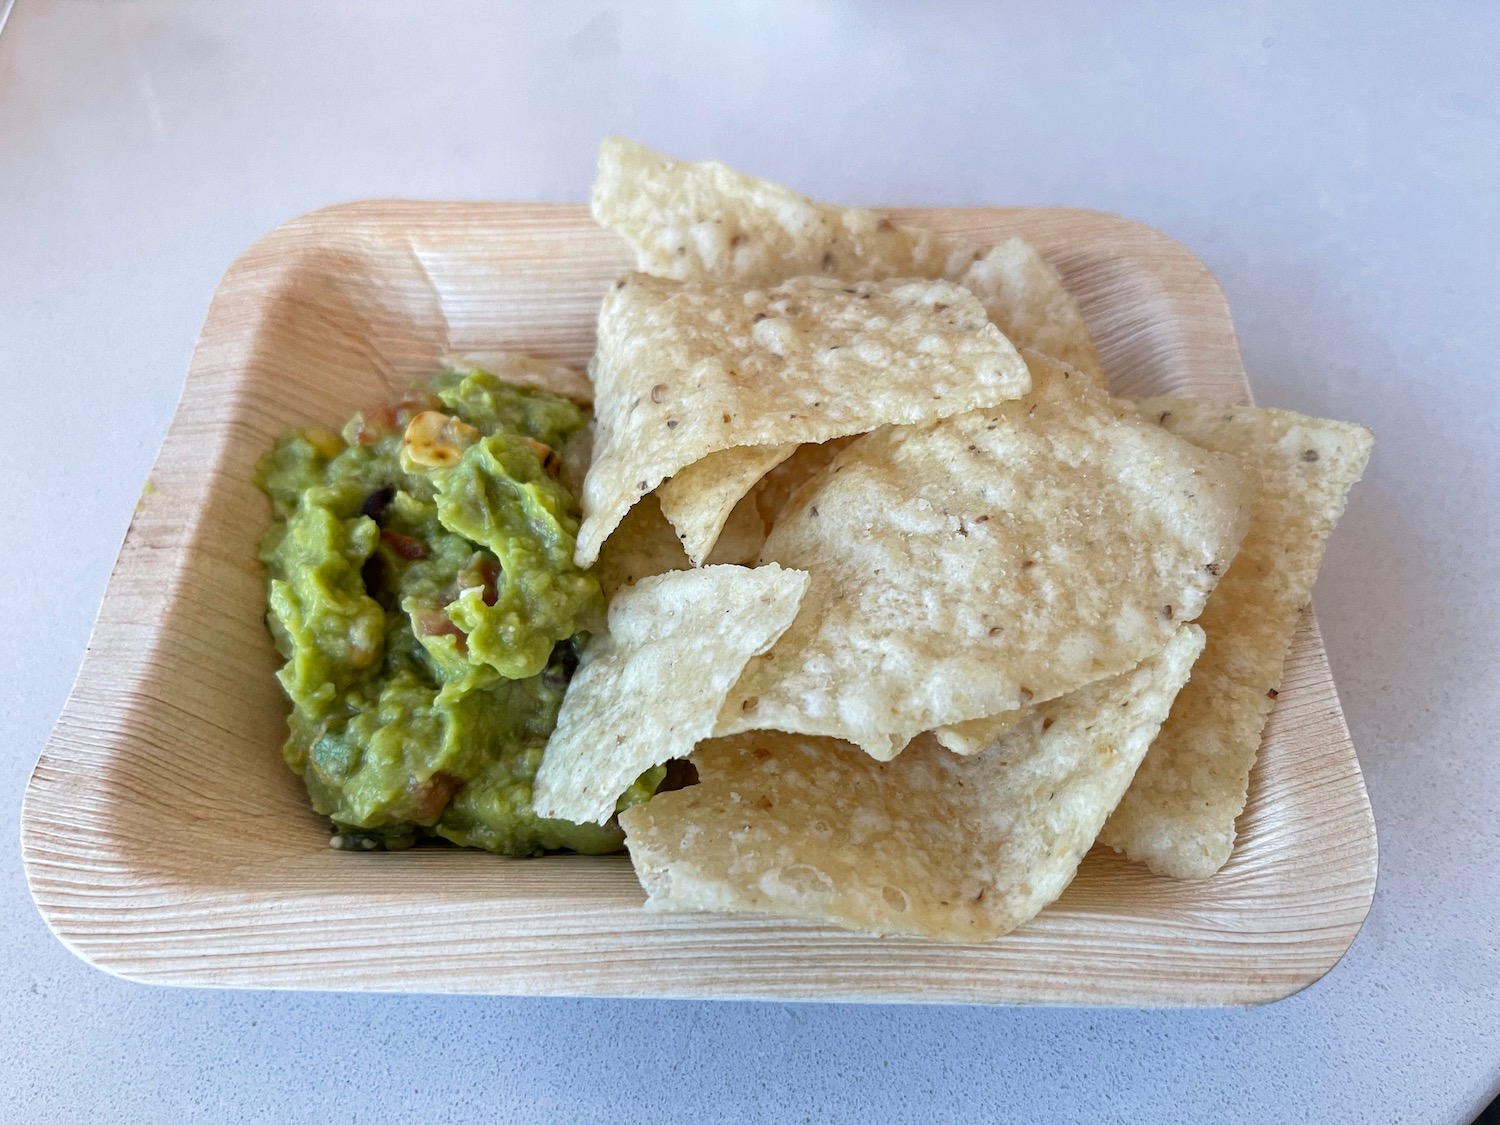 a bowl of chips and guacamole